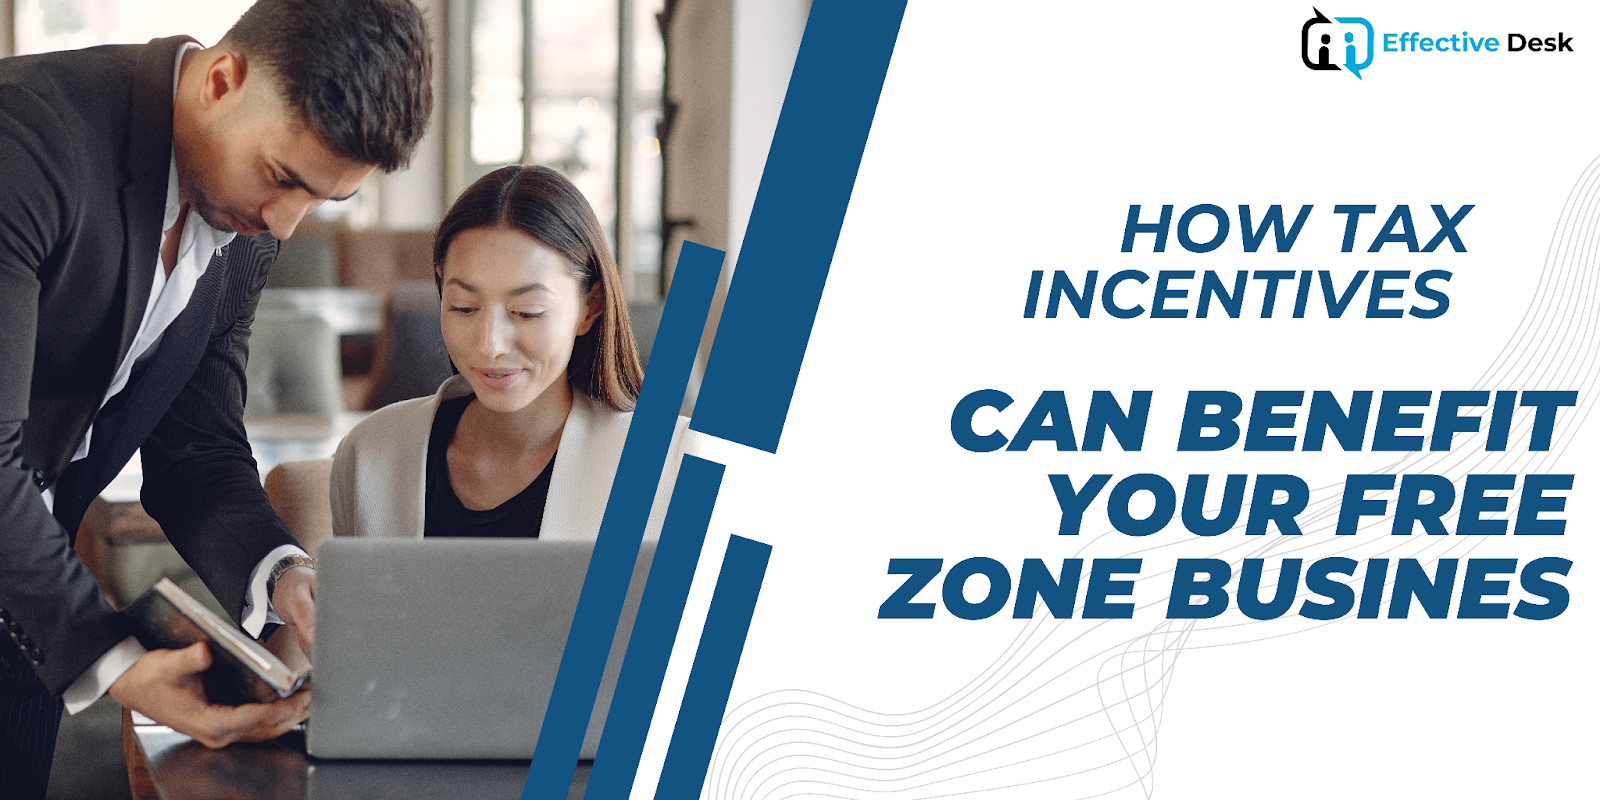 How Tax Incentives Can Benefit Your Free Zone Business